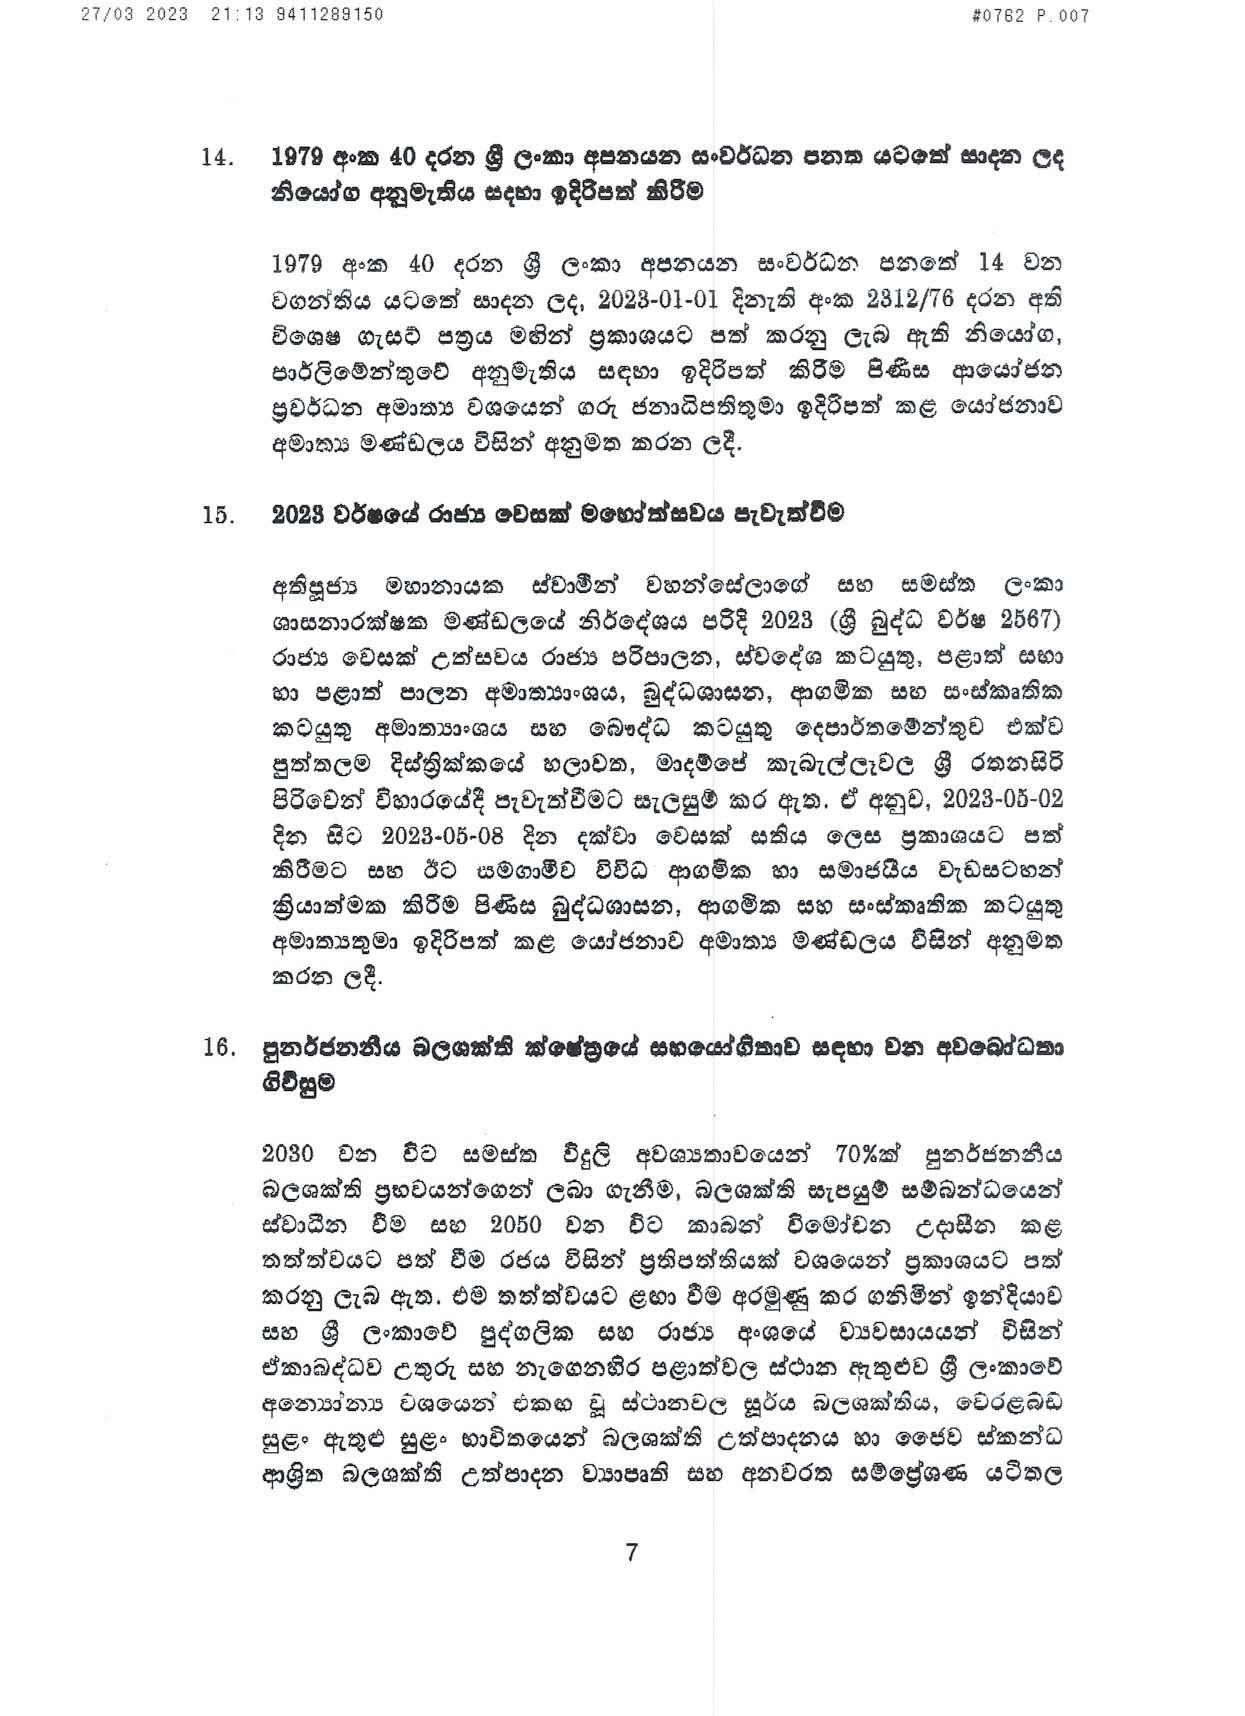 Cabinet Decision on 27.03.2023 page 007